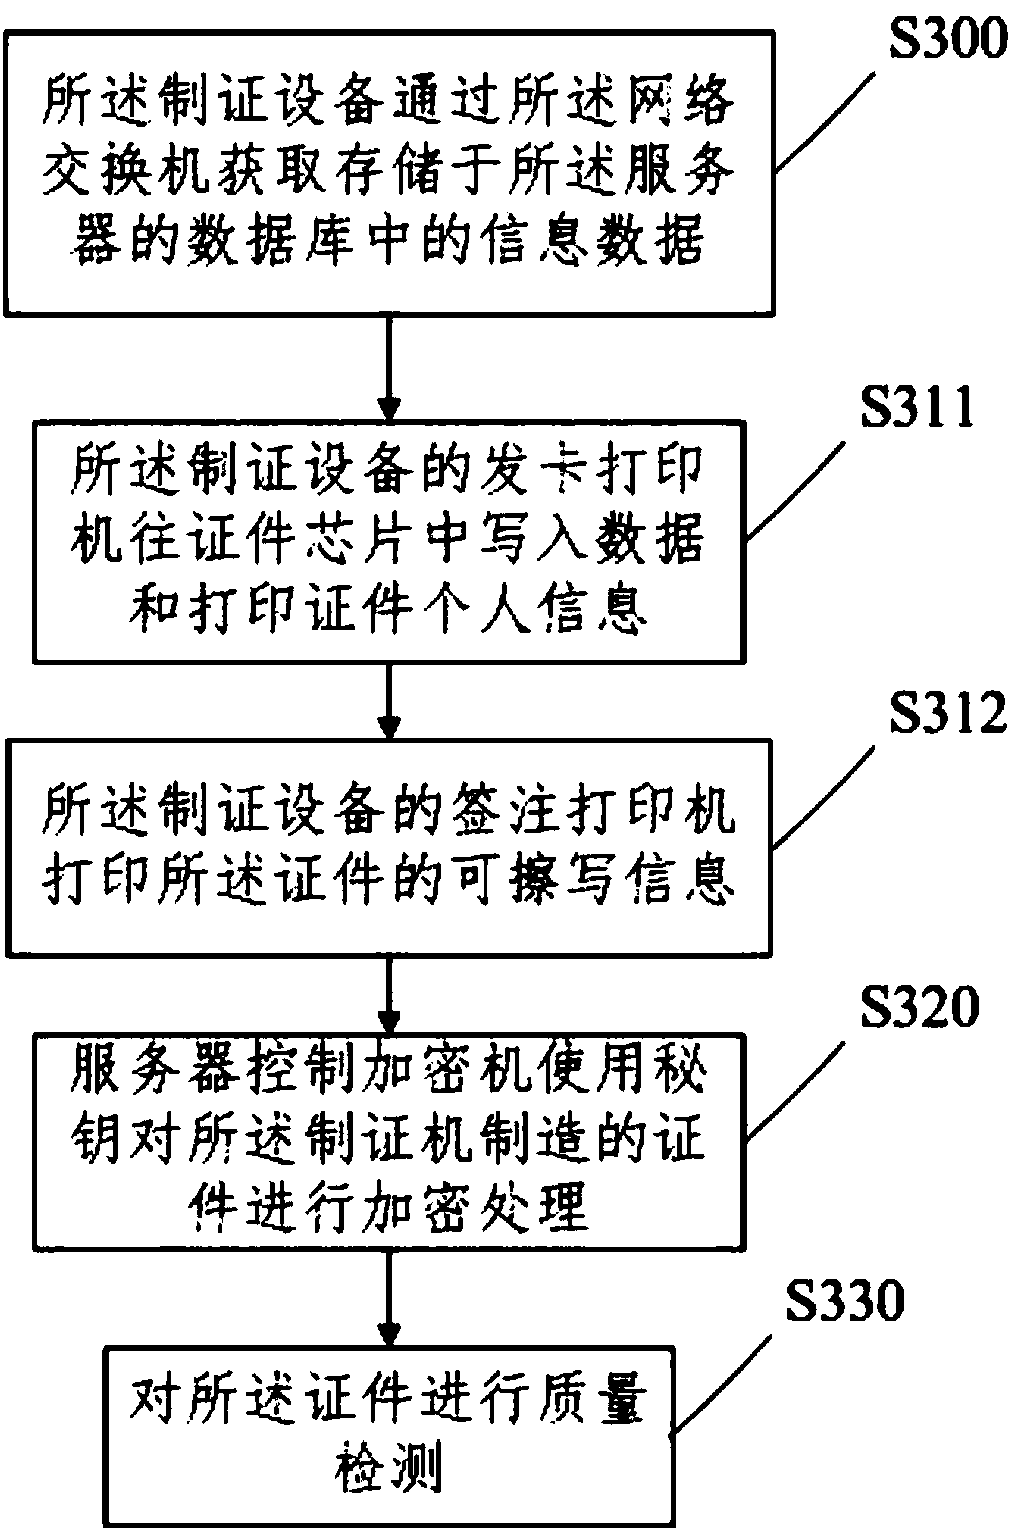 Document manufacturing system and method